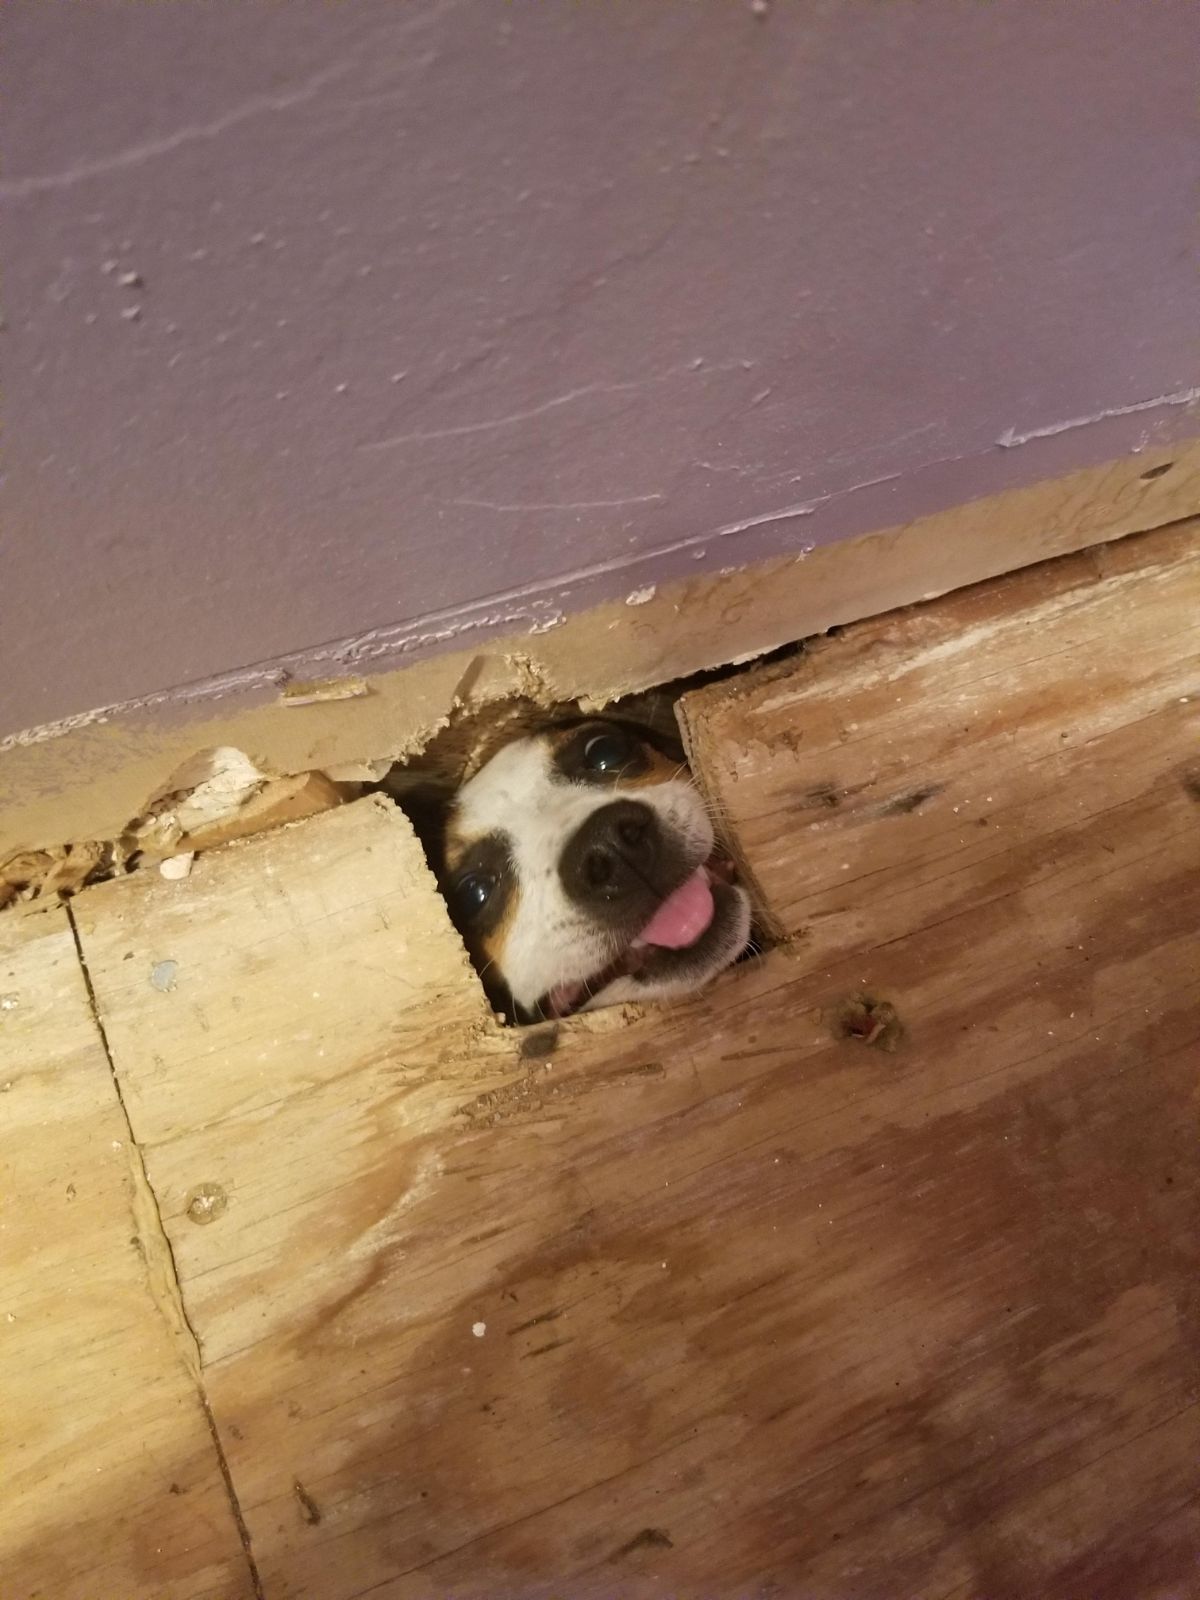 white and brown dog's face peeking out from hole in wooden floor